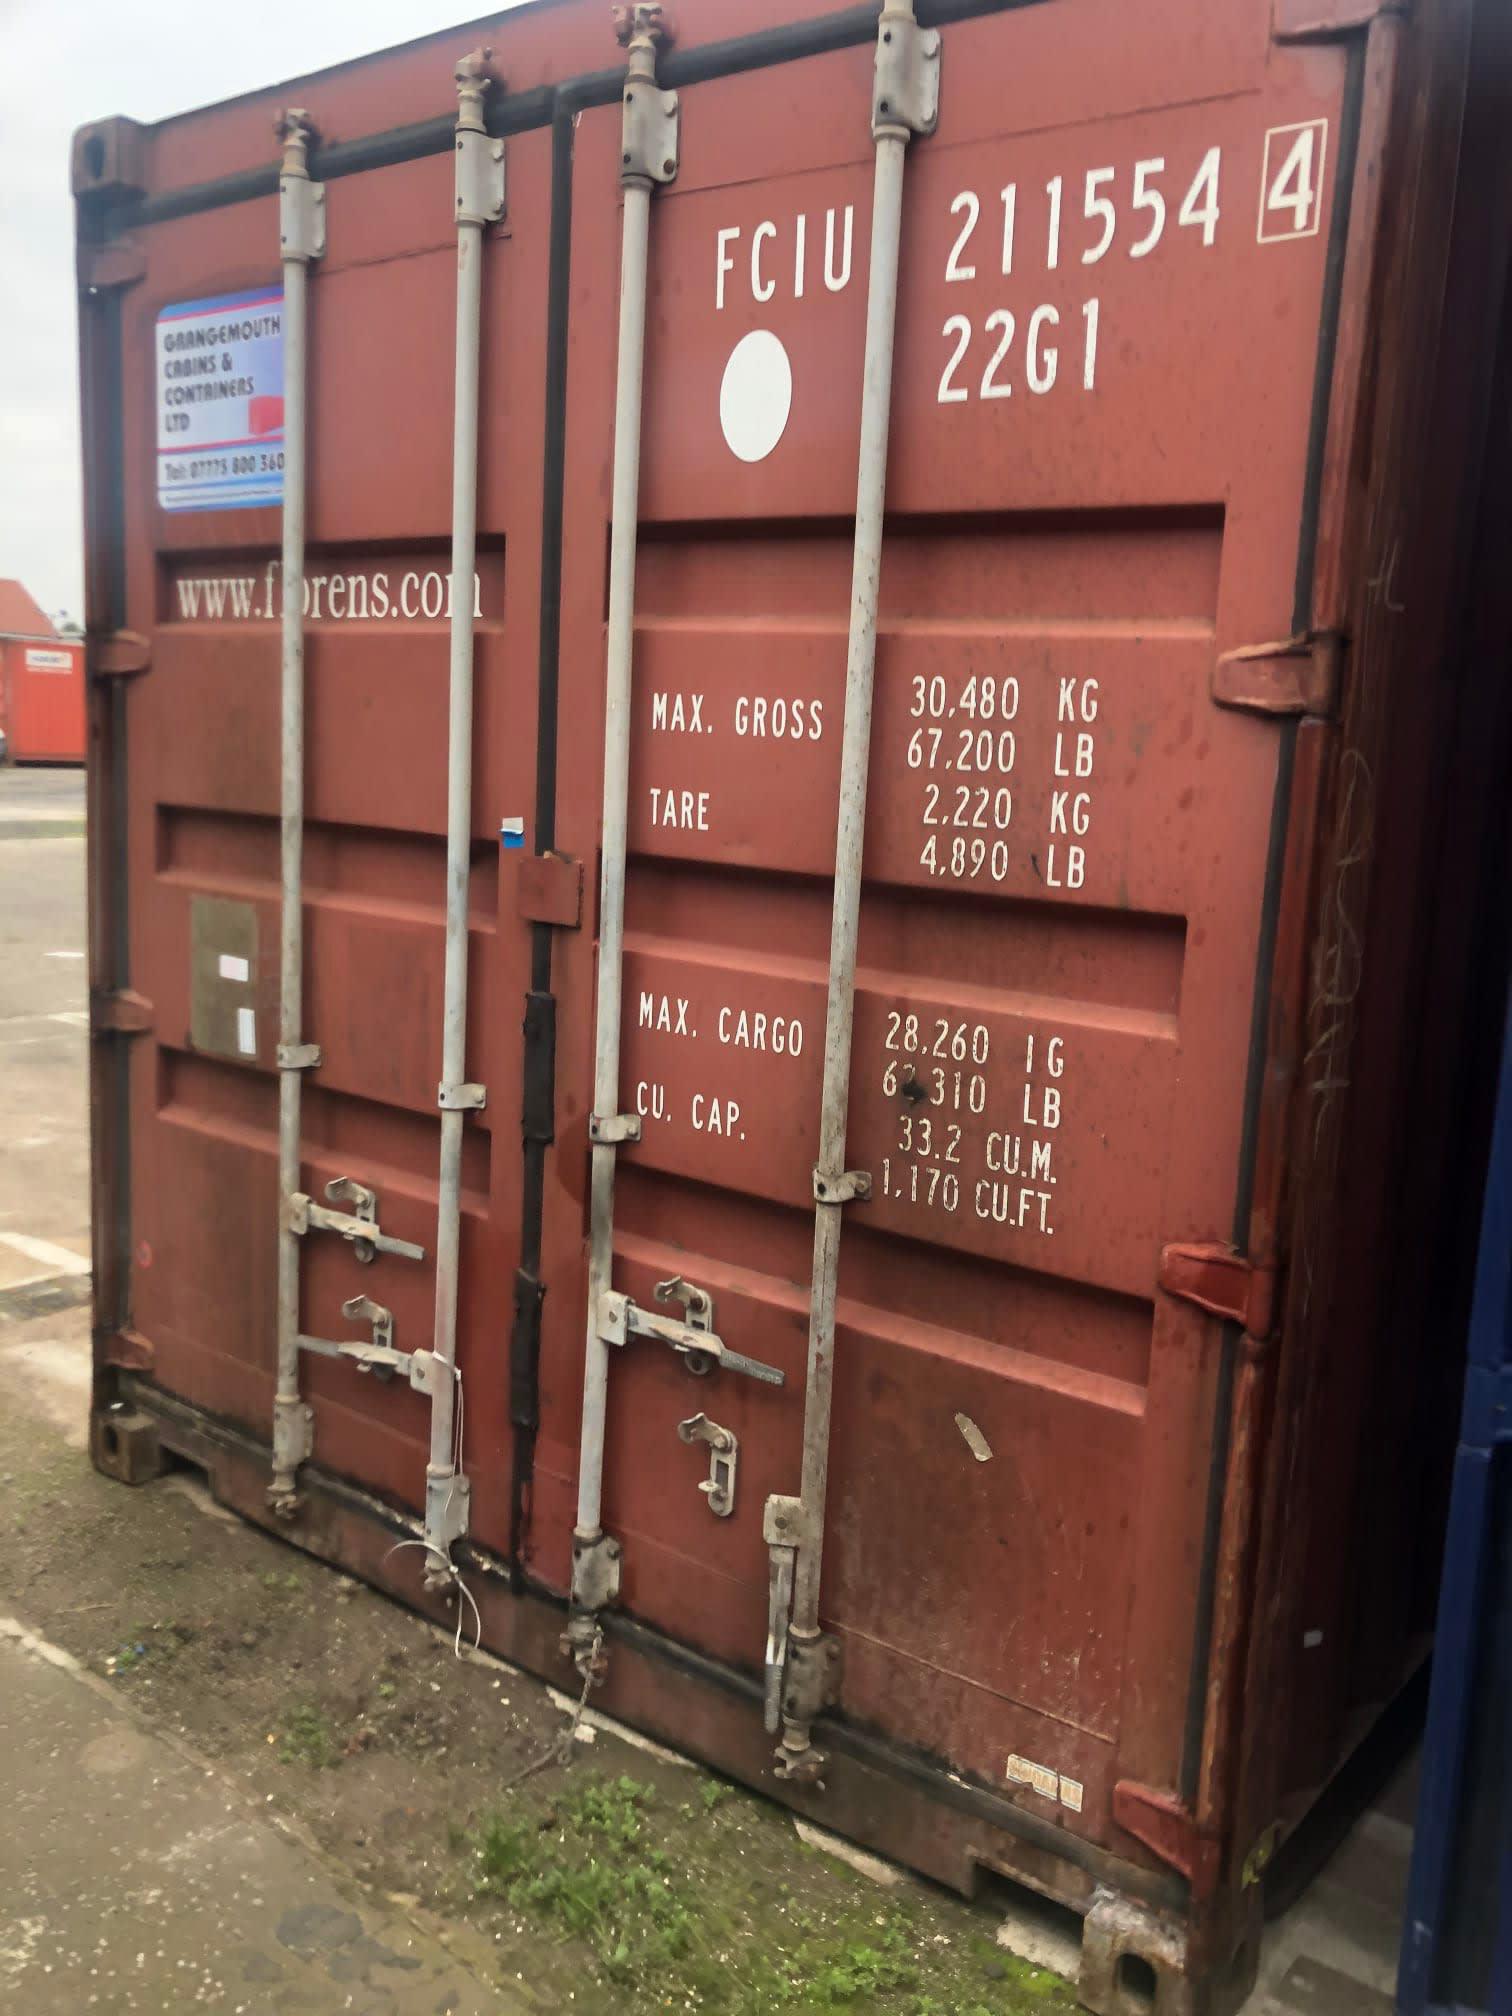 Images Grangemouth Cabins & Containers Ltd